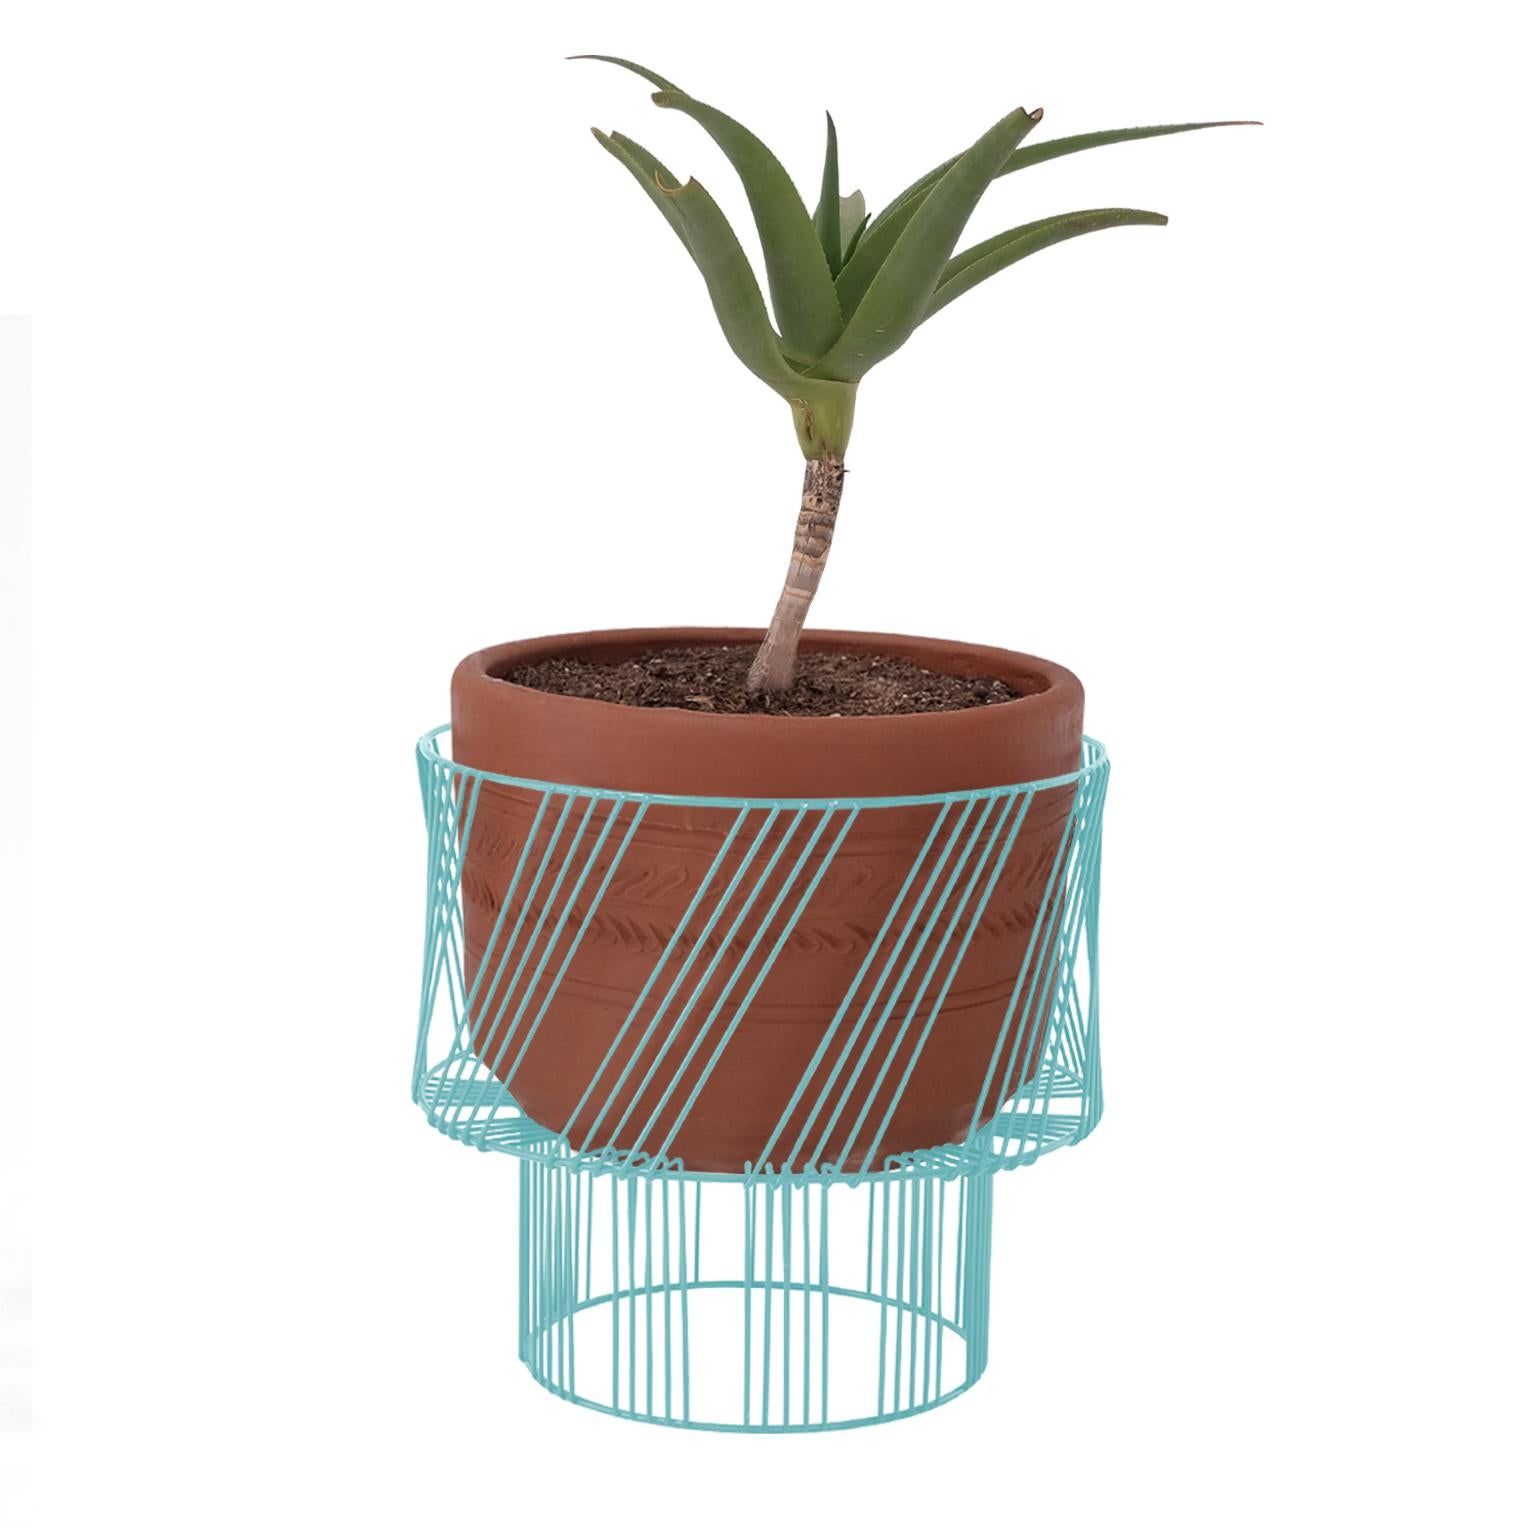 House plants are one of the hottest home accessories🪴 - *Limited Stock Run, once they are gone that's it!*

Level up your plant game with a standing planter. Our Plant Stand is a tiered wire design that's made from a series of parallel lines